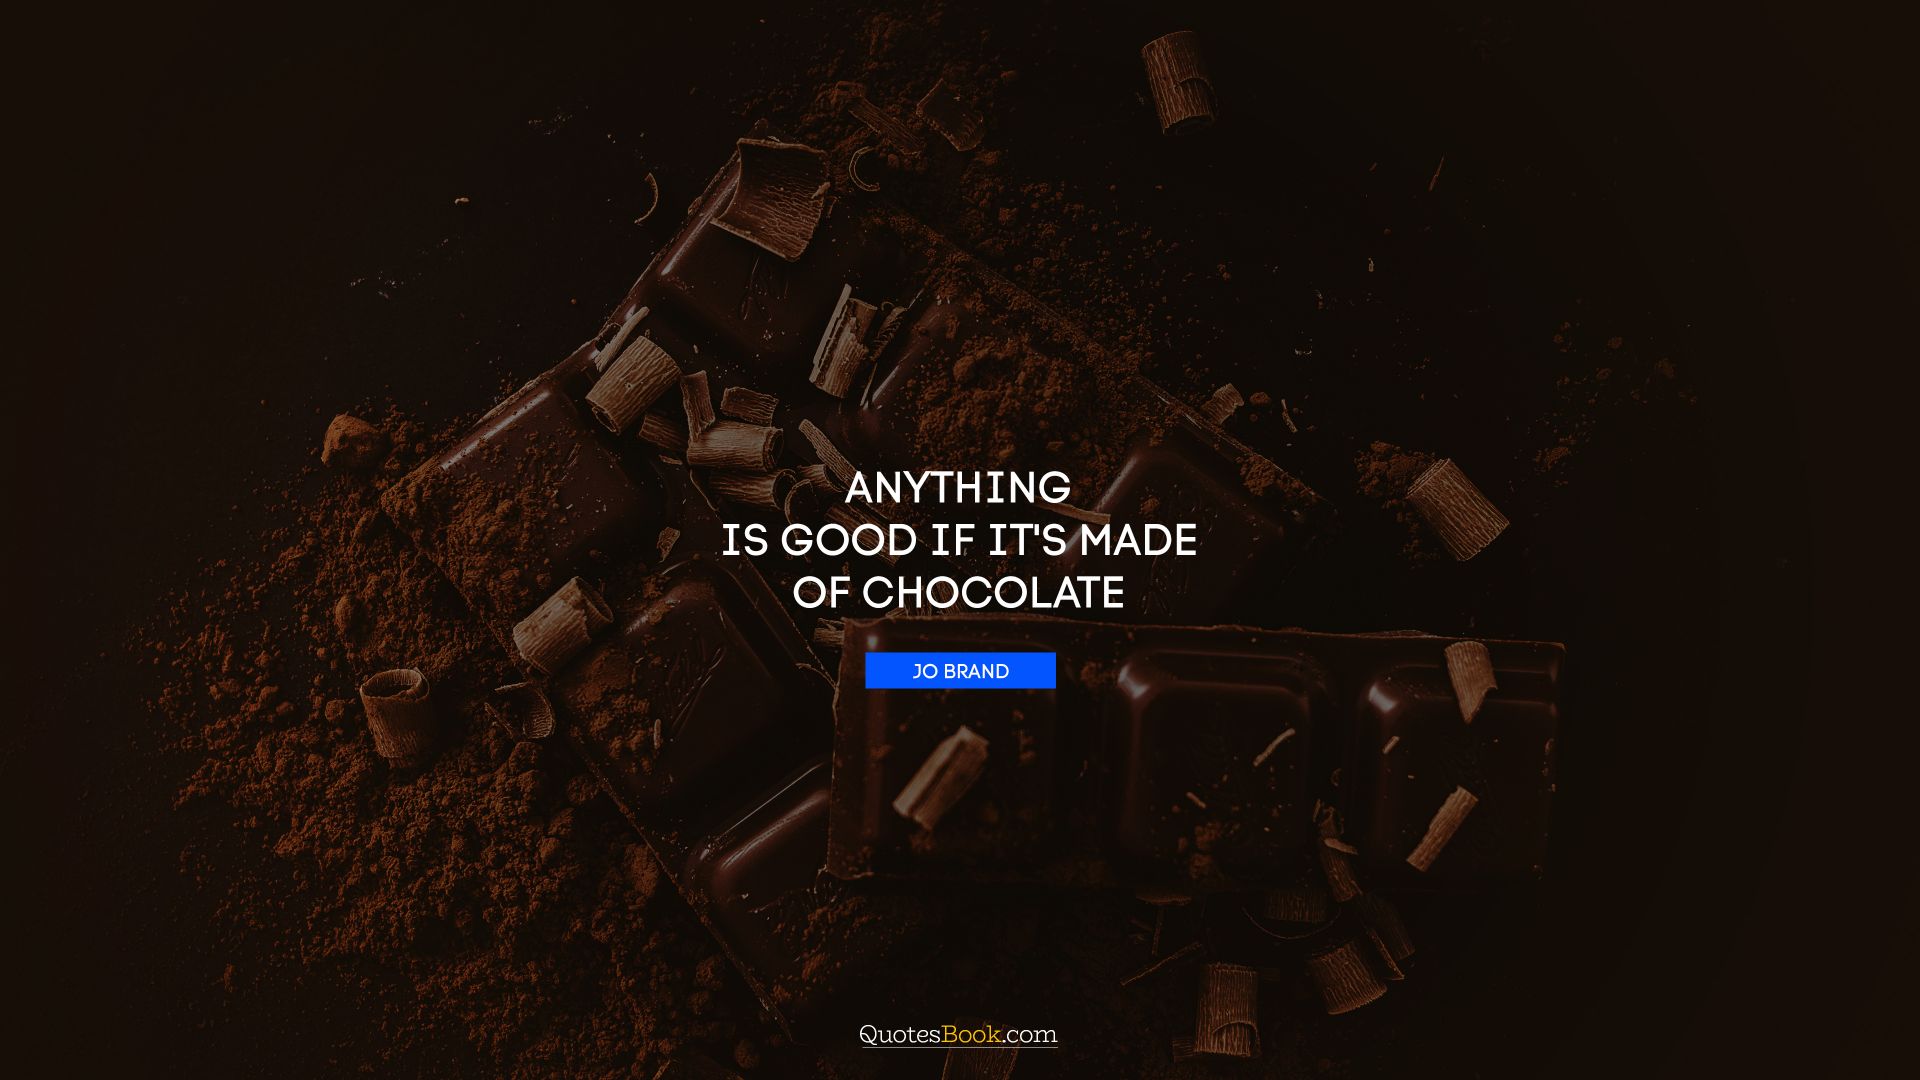 Anything is good if it's made of chocolate. - Quote by Jo Brand